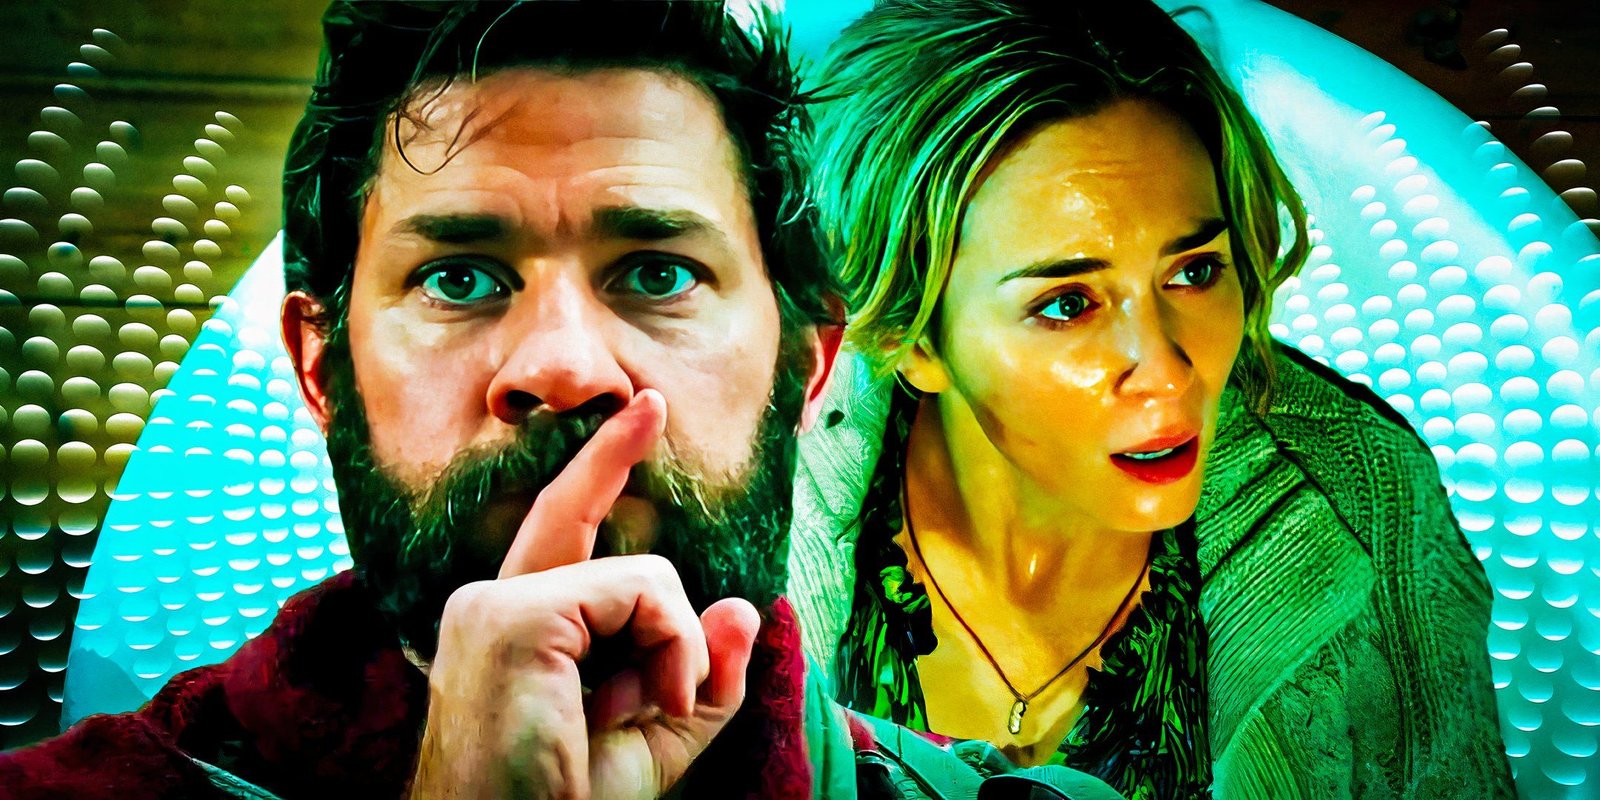 What Happened On Every Day In A Quiet Place